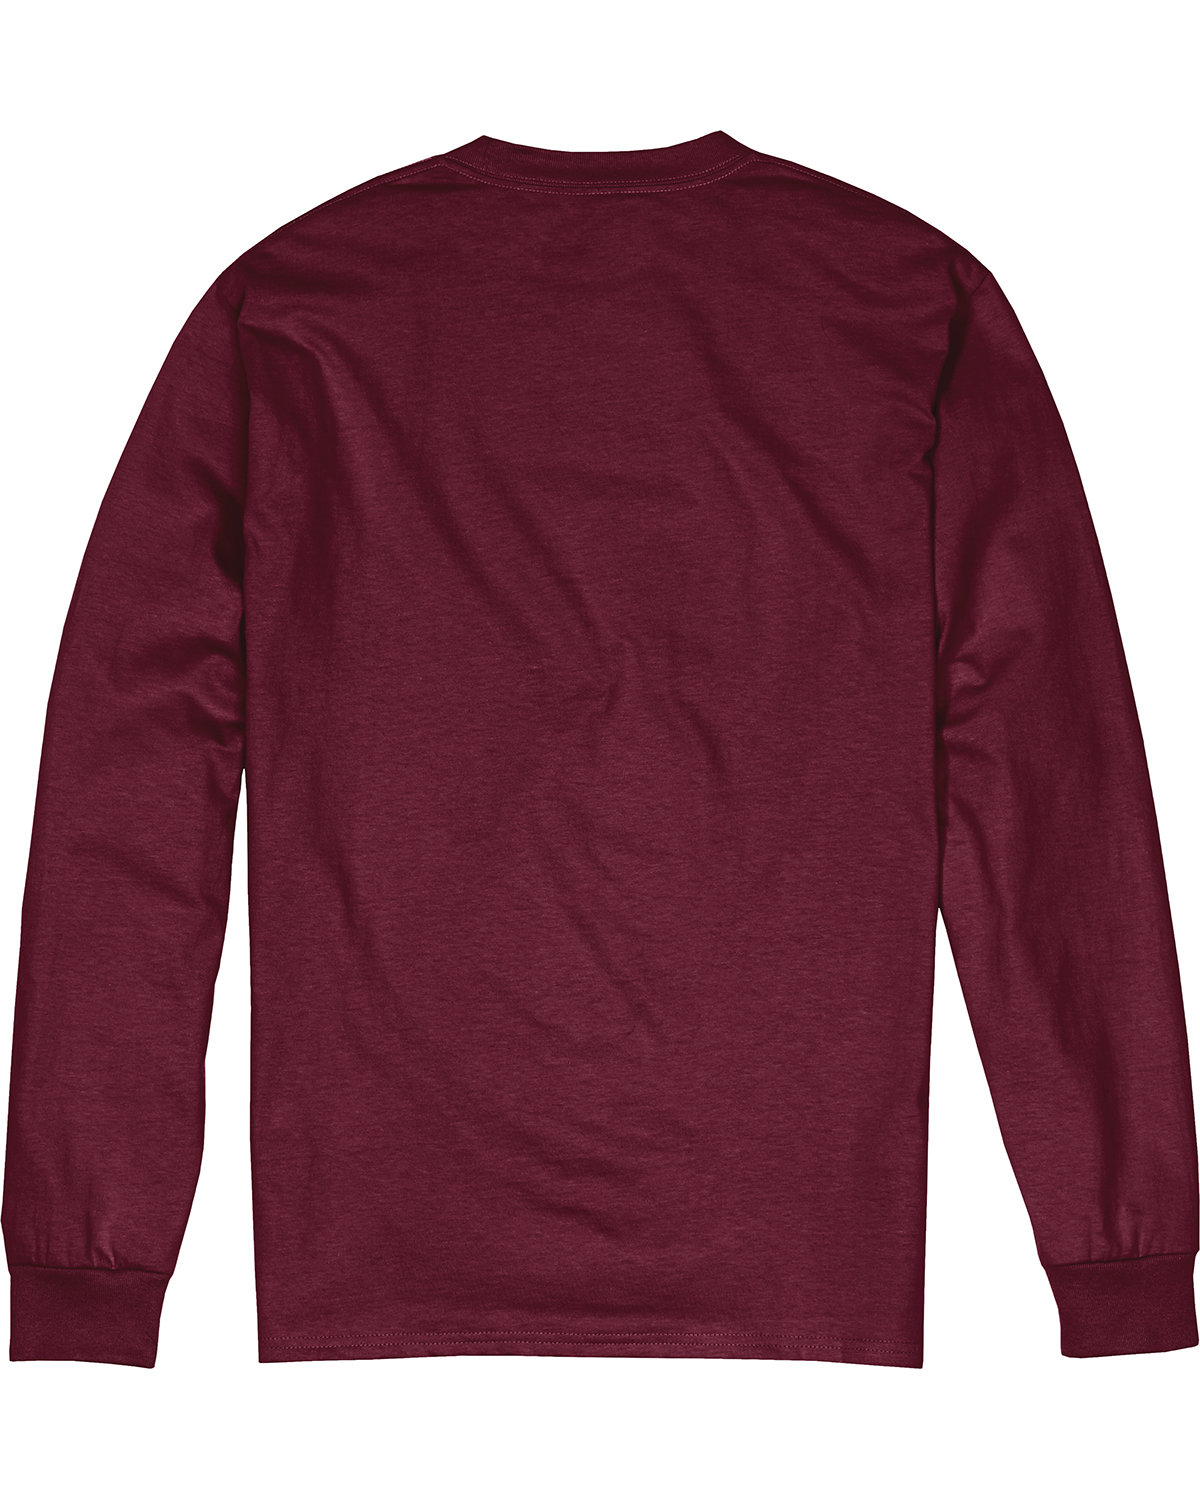 Hanes Adult Long-Sleeve Beefy-T® | alphabroder